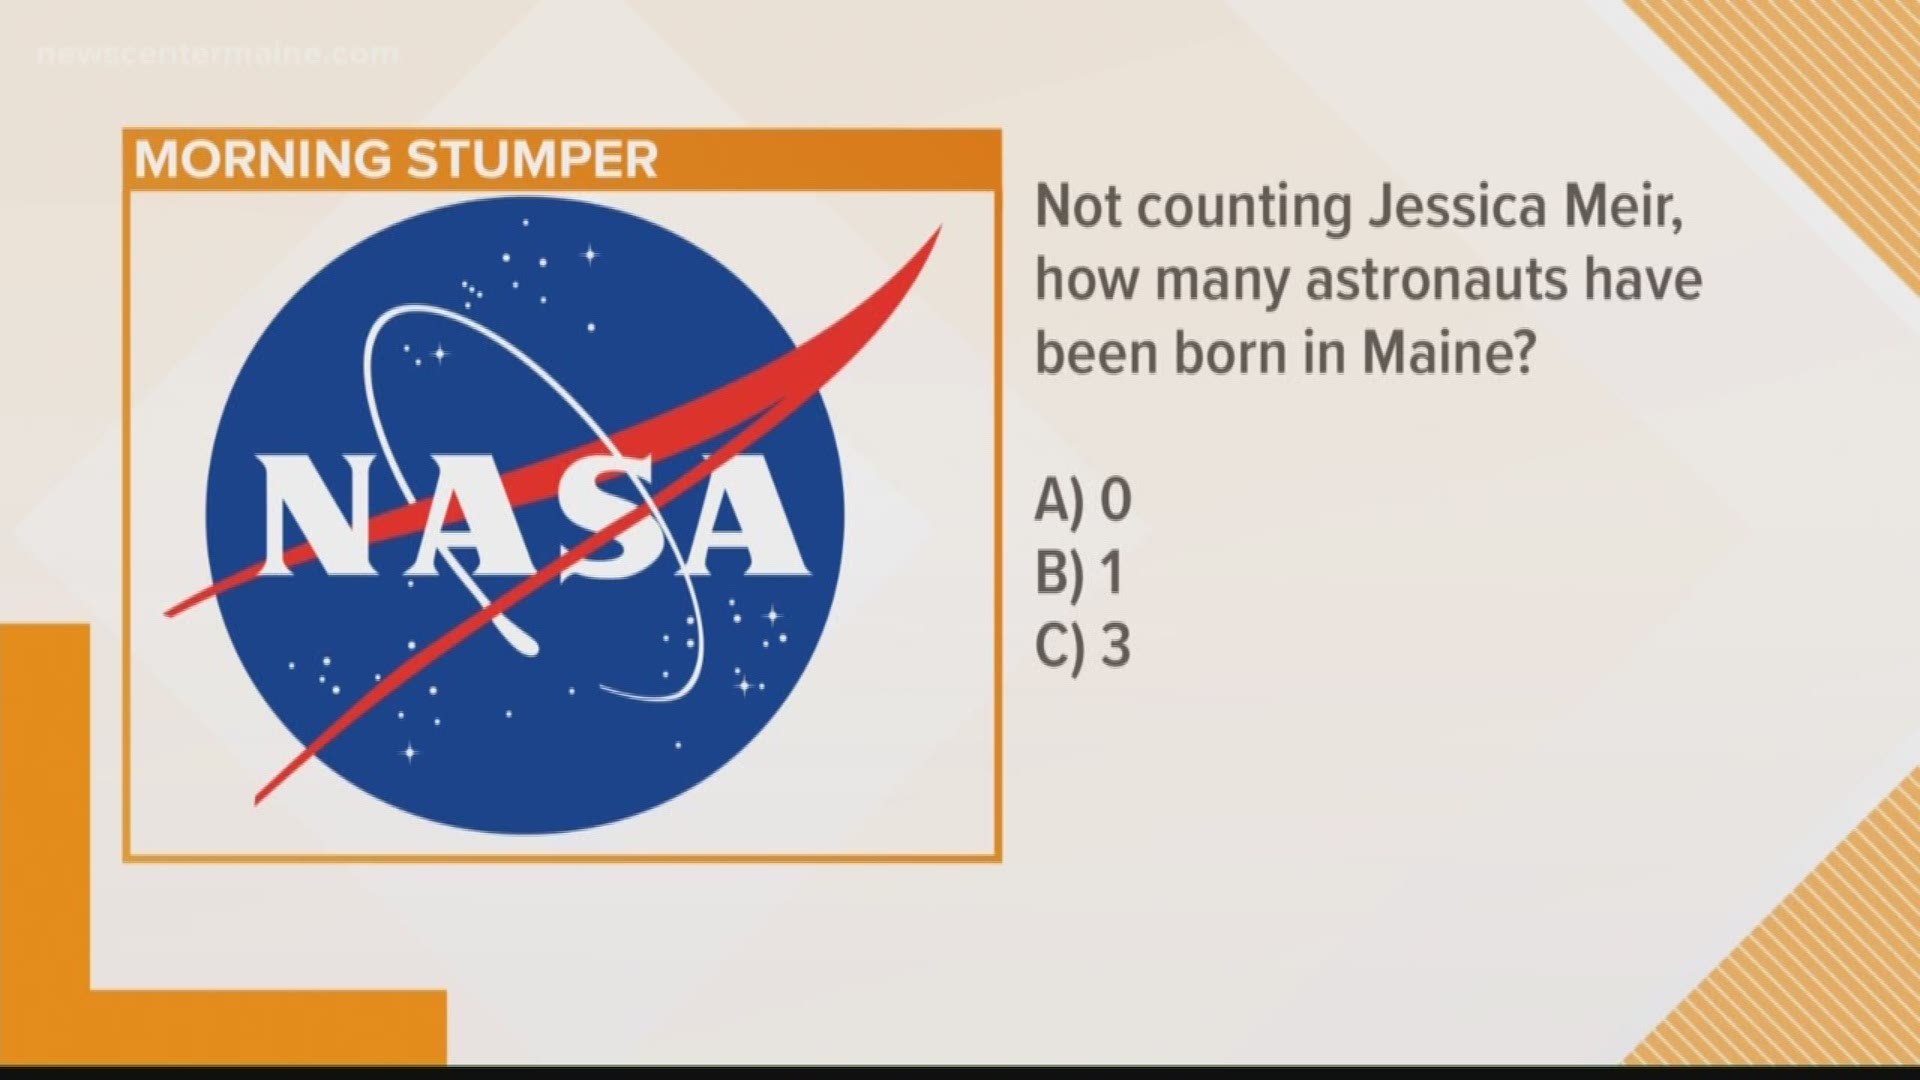 For today's stumper we asked: Not counting Jessica Meir, who we will talk about in just a minute. How many astronauts have been born in Maine?